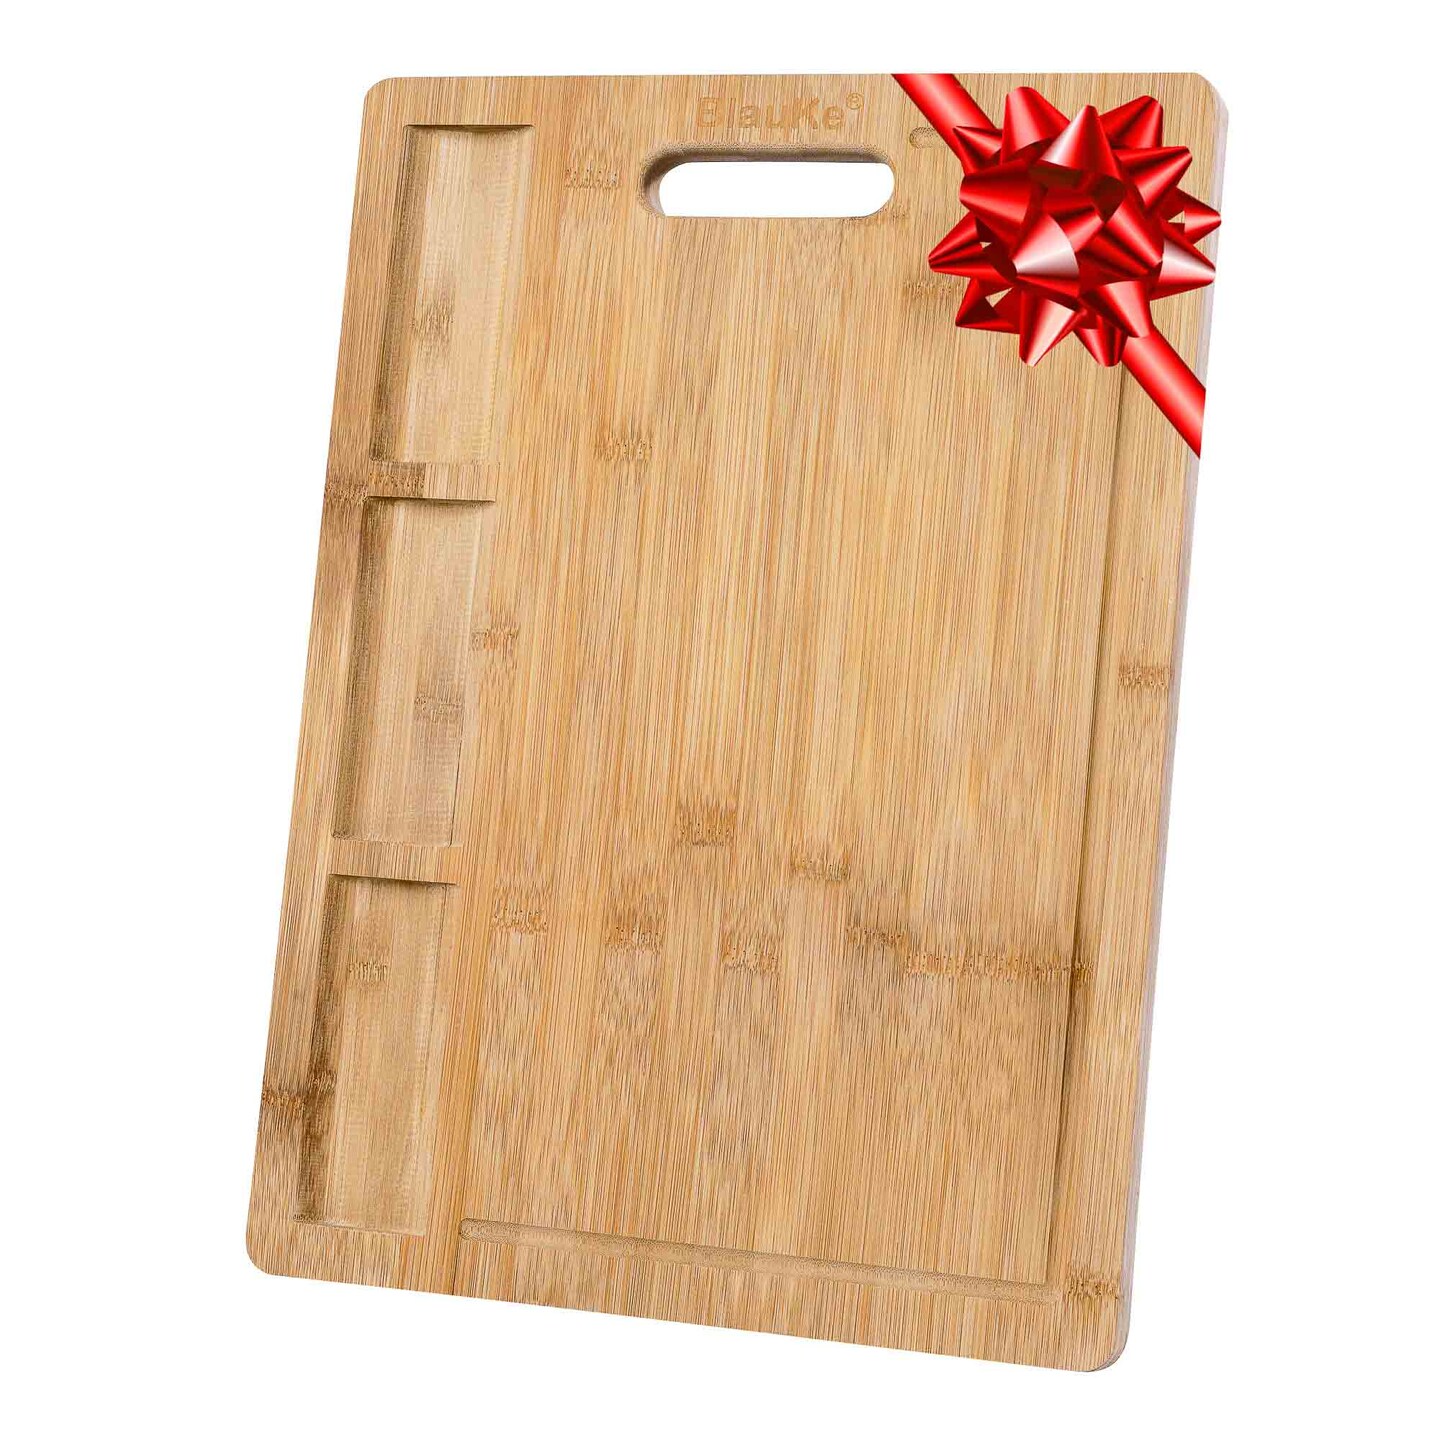 Bamboo Cutting Boards for Kitchen with Juice Groove [Set of 2] Wood Cutting  Board for Chopping Meat, Vegetables, Fruits, Cheese, Knife Friendly